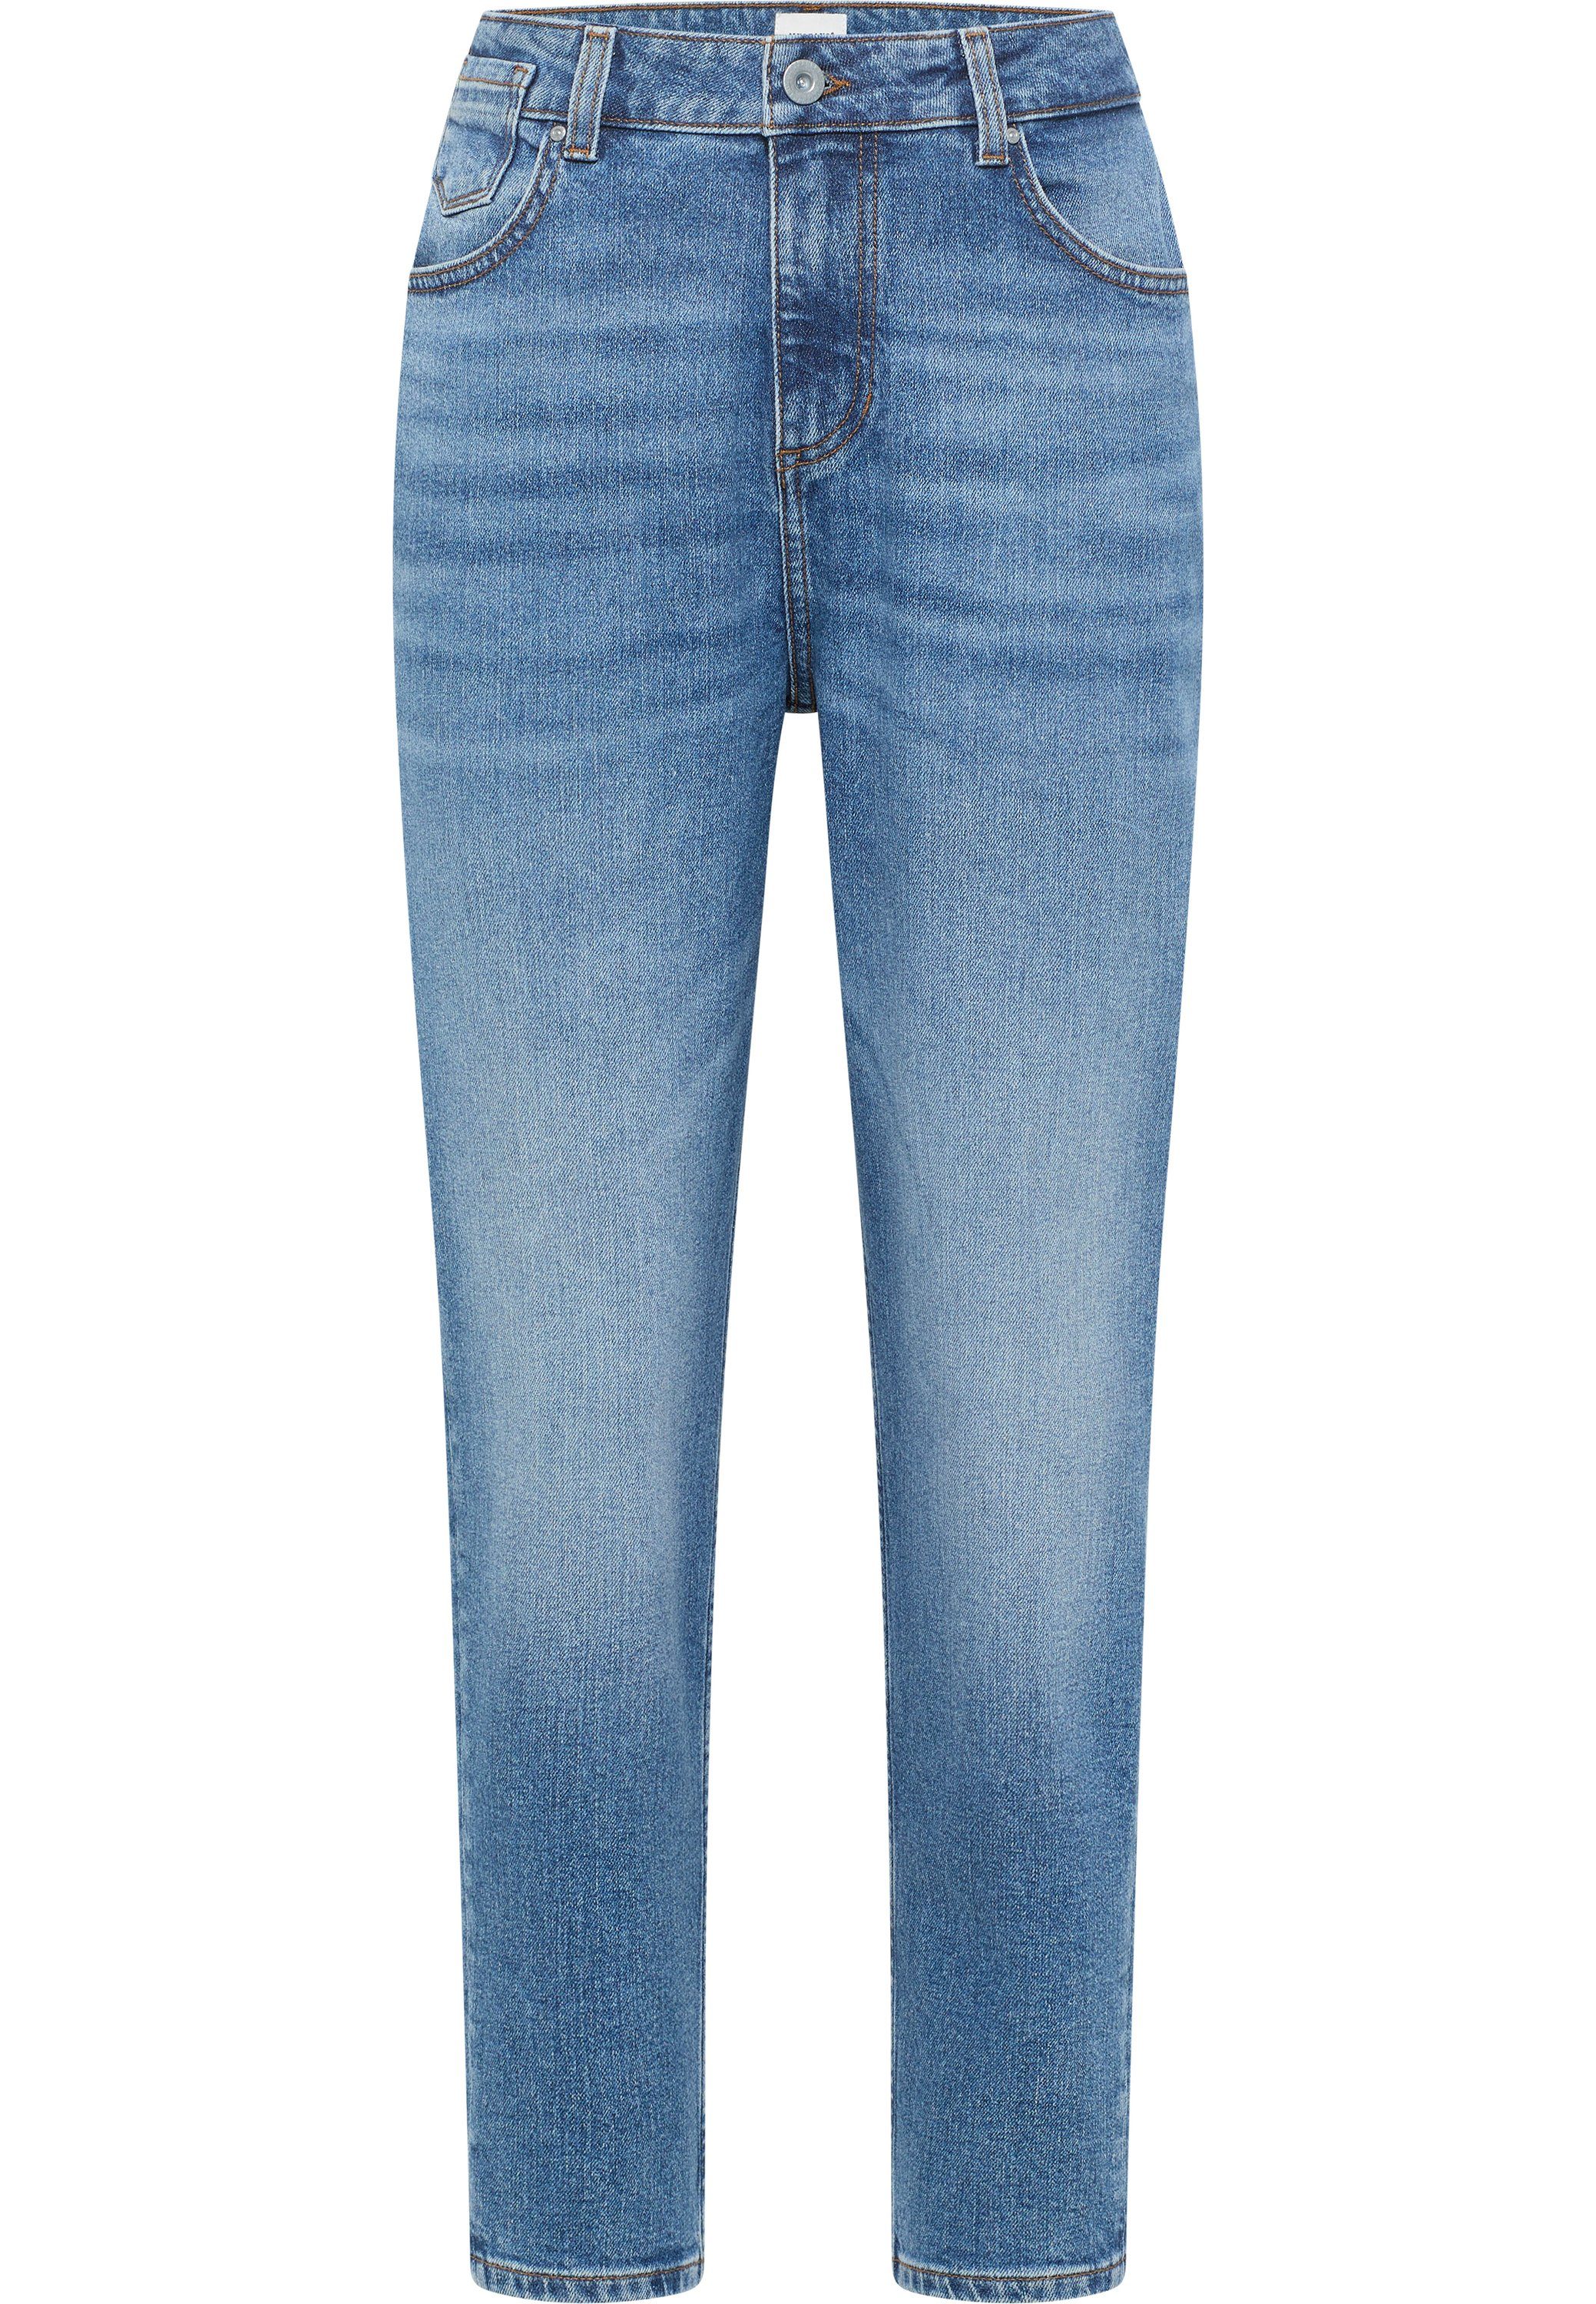 MUSTANG Mom-Jeans Style Charlotte Tapered